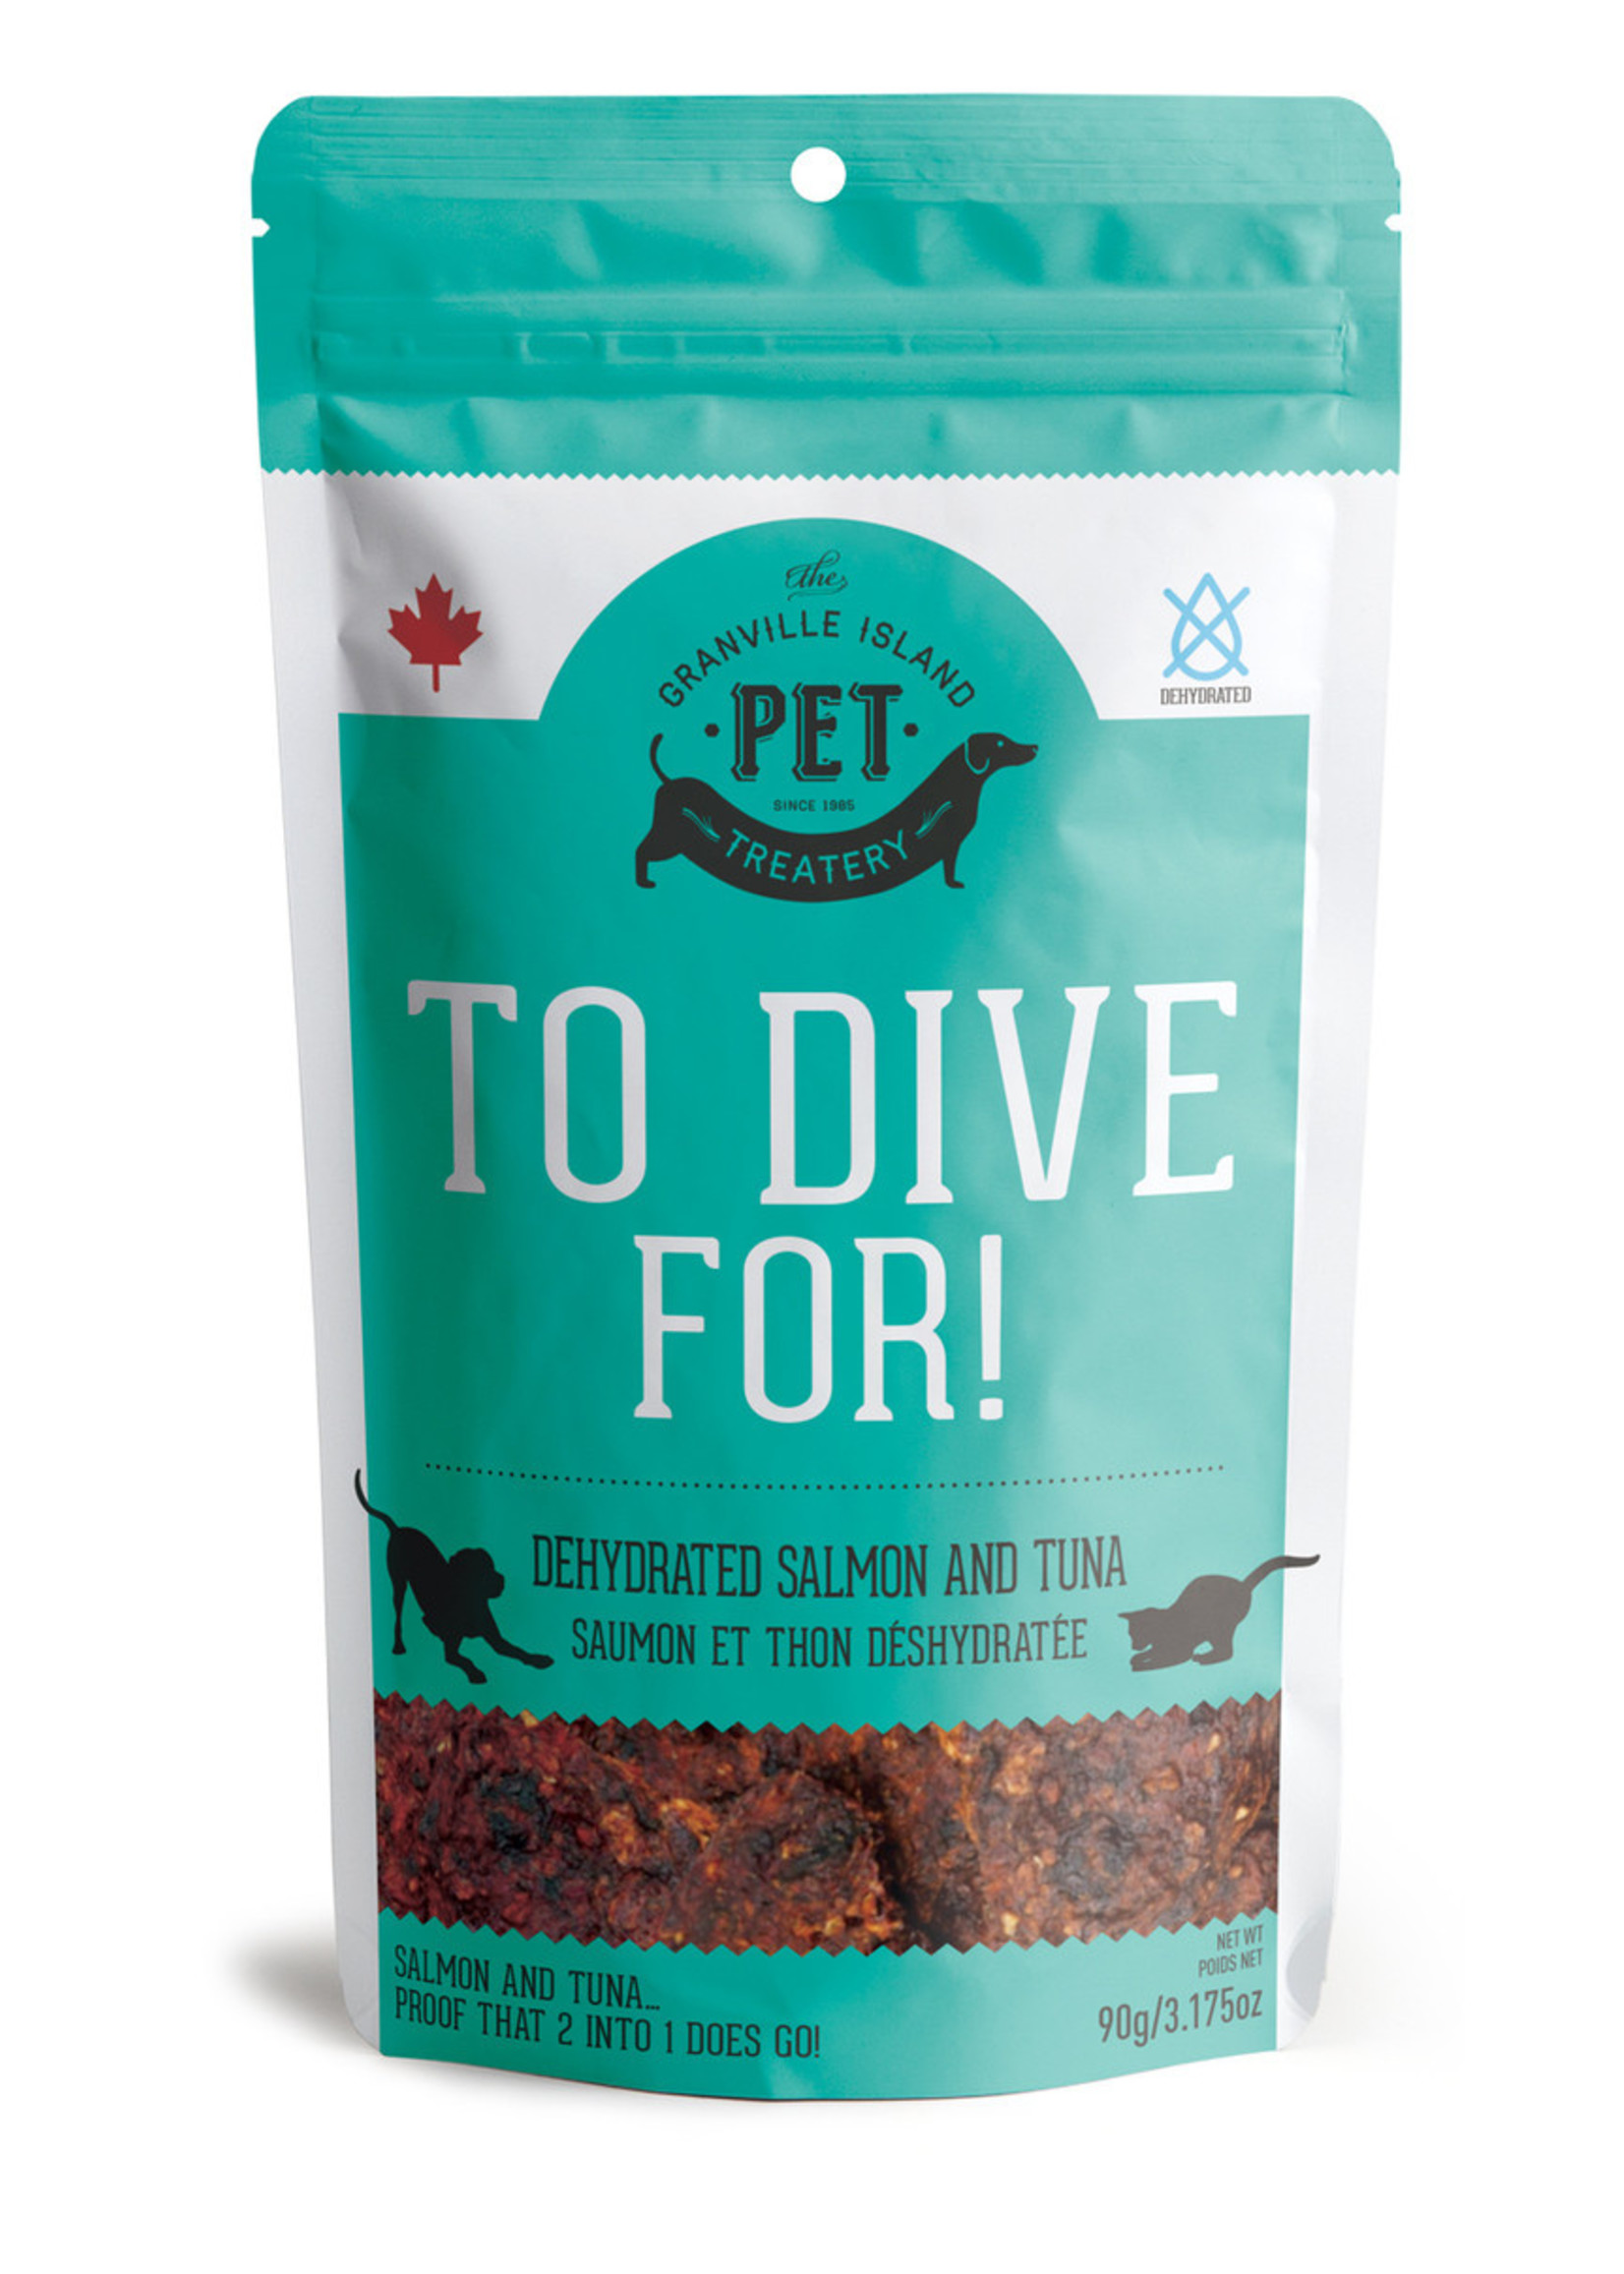 To Dive For, Dehydrated Salmon And Tuna 90g